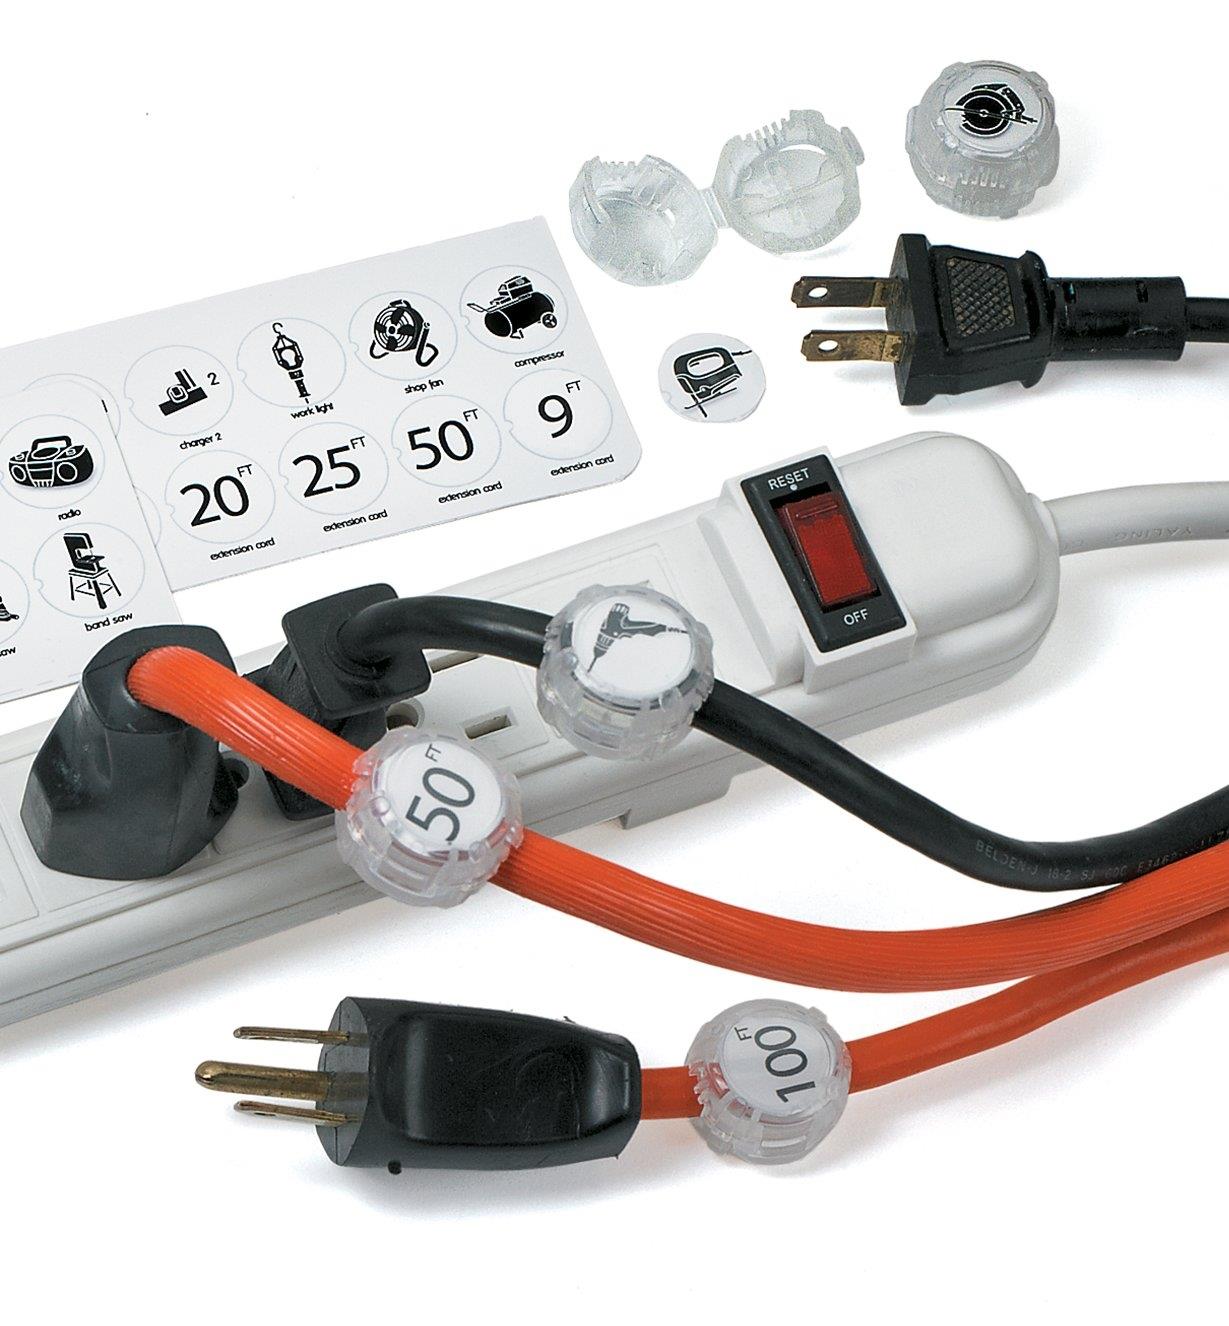 A power bar with cords plugged in or lying to the side, each with a large cord identifier attached